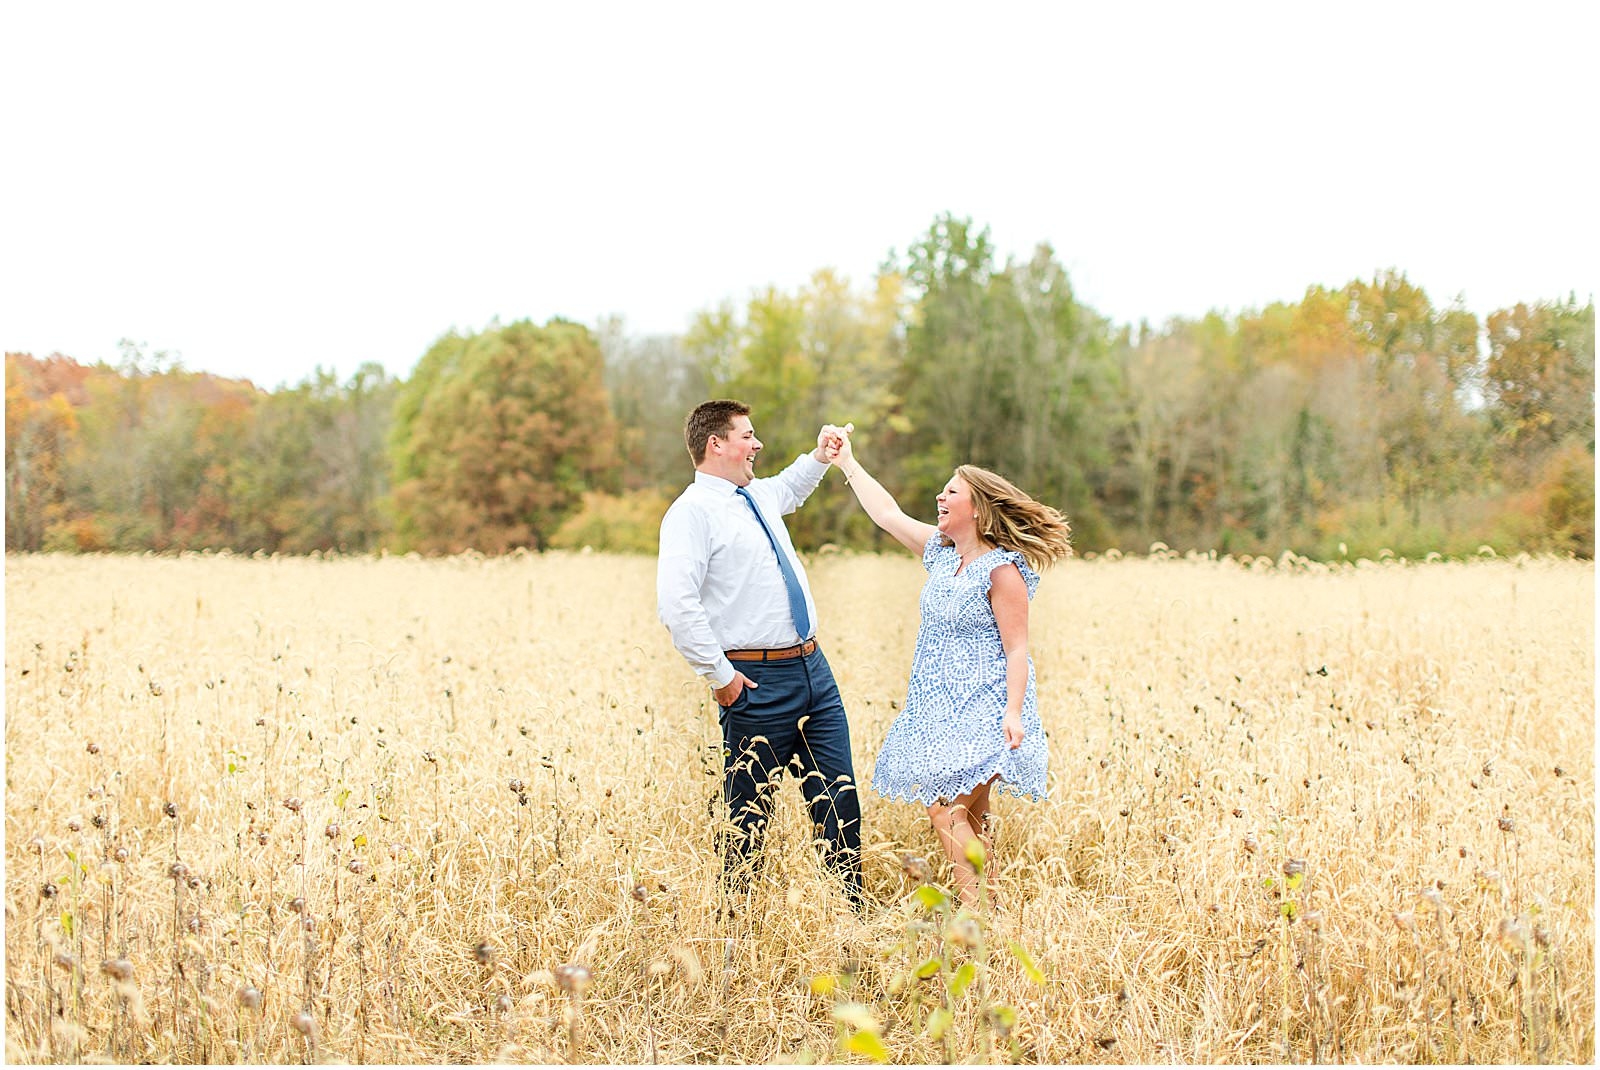 A Southern Illinois Engagement Session | Roxanne and Matthew | Bret and Brandie Photography 0028.jpg